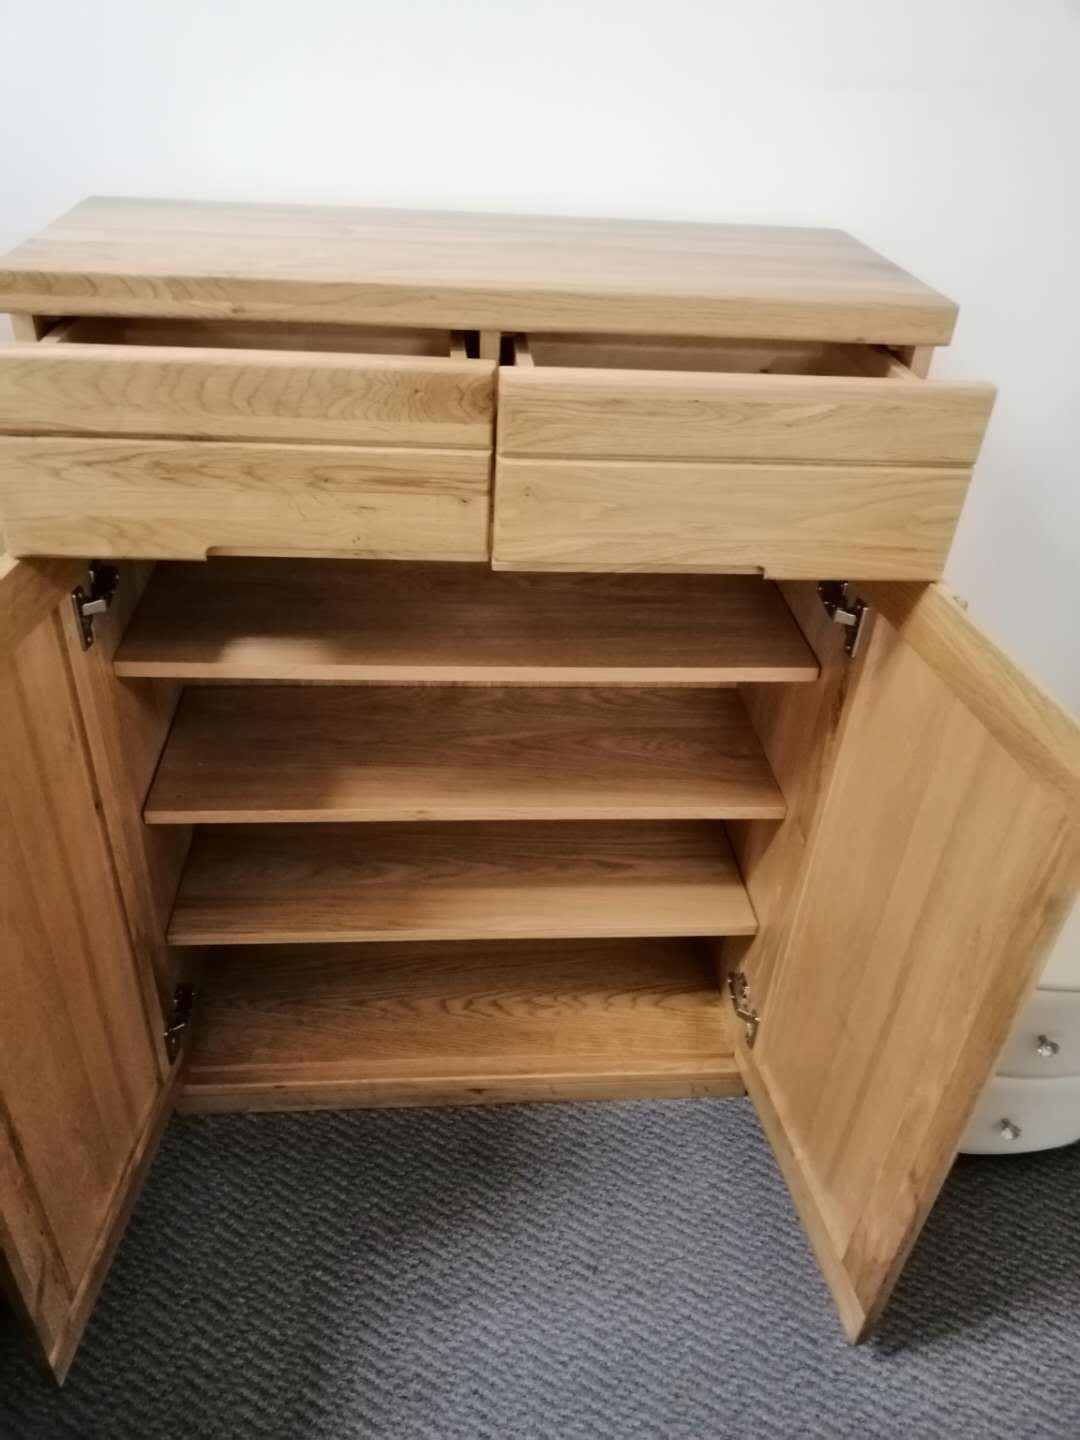 Solid Oak 2 Door 2 drawer shoe case/cabinet available now